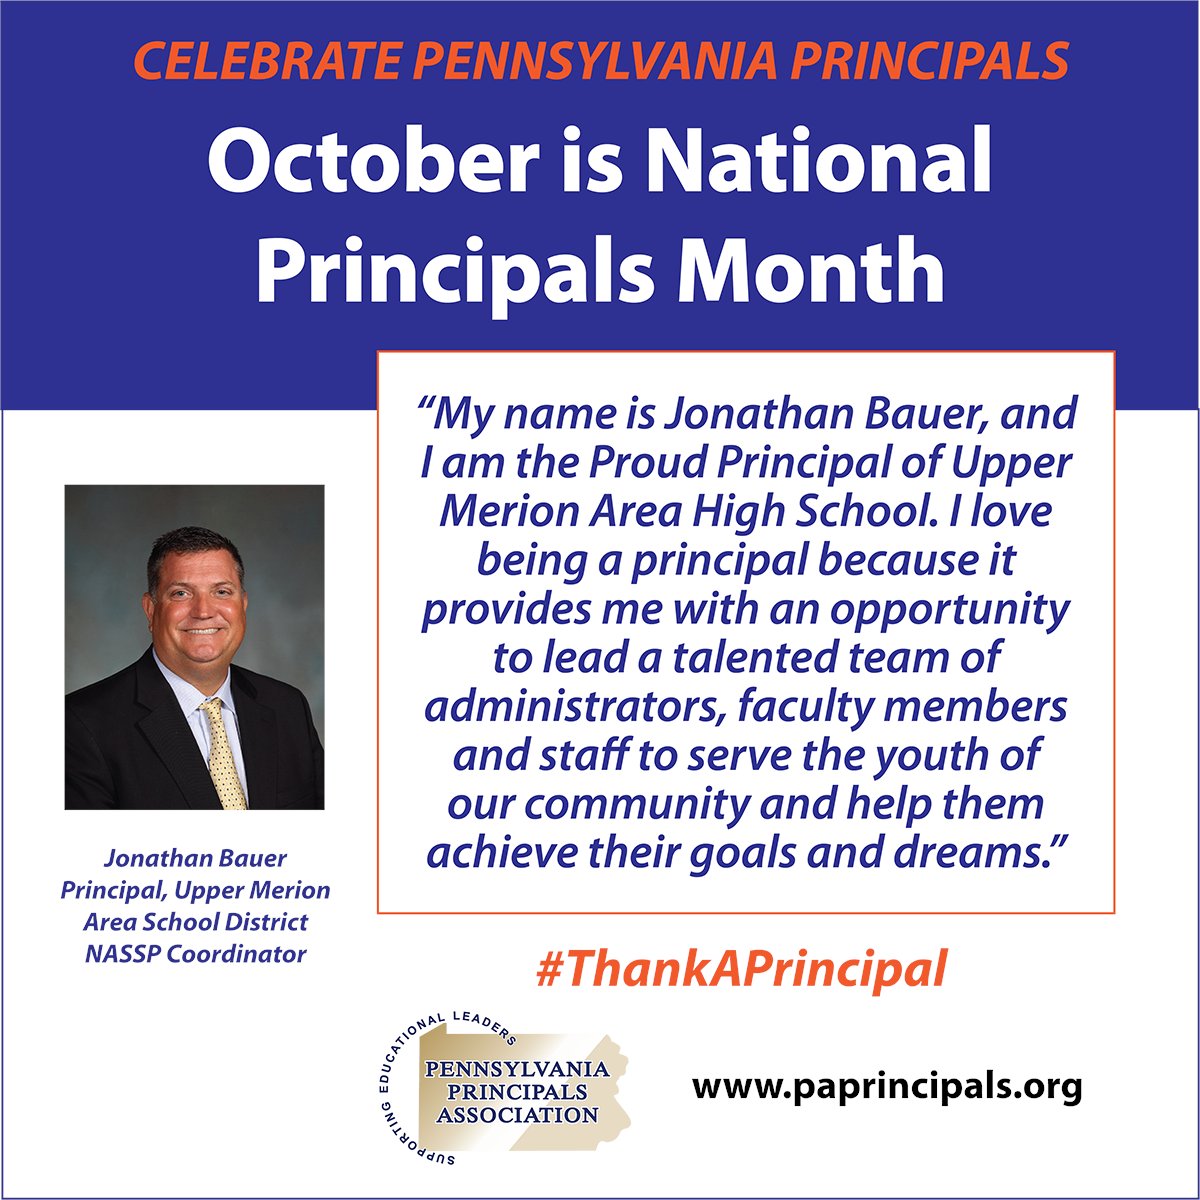 School principals are the bedrock of our education system, shaping the path of our students’ academic journeys. National Principals Month is a time to honor these dedicated leaders. #ThankAPrincipal #PAPRINCIPALS @NAESP @NASSP @JBauerUM @UpperMerionSD